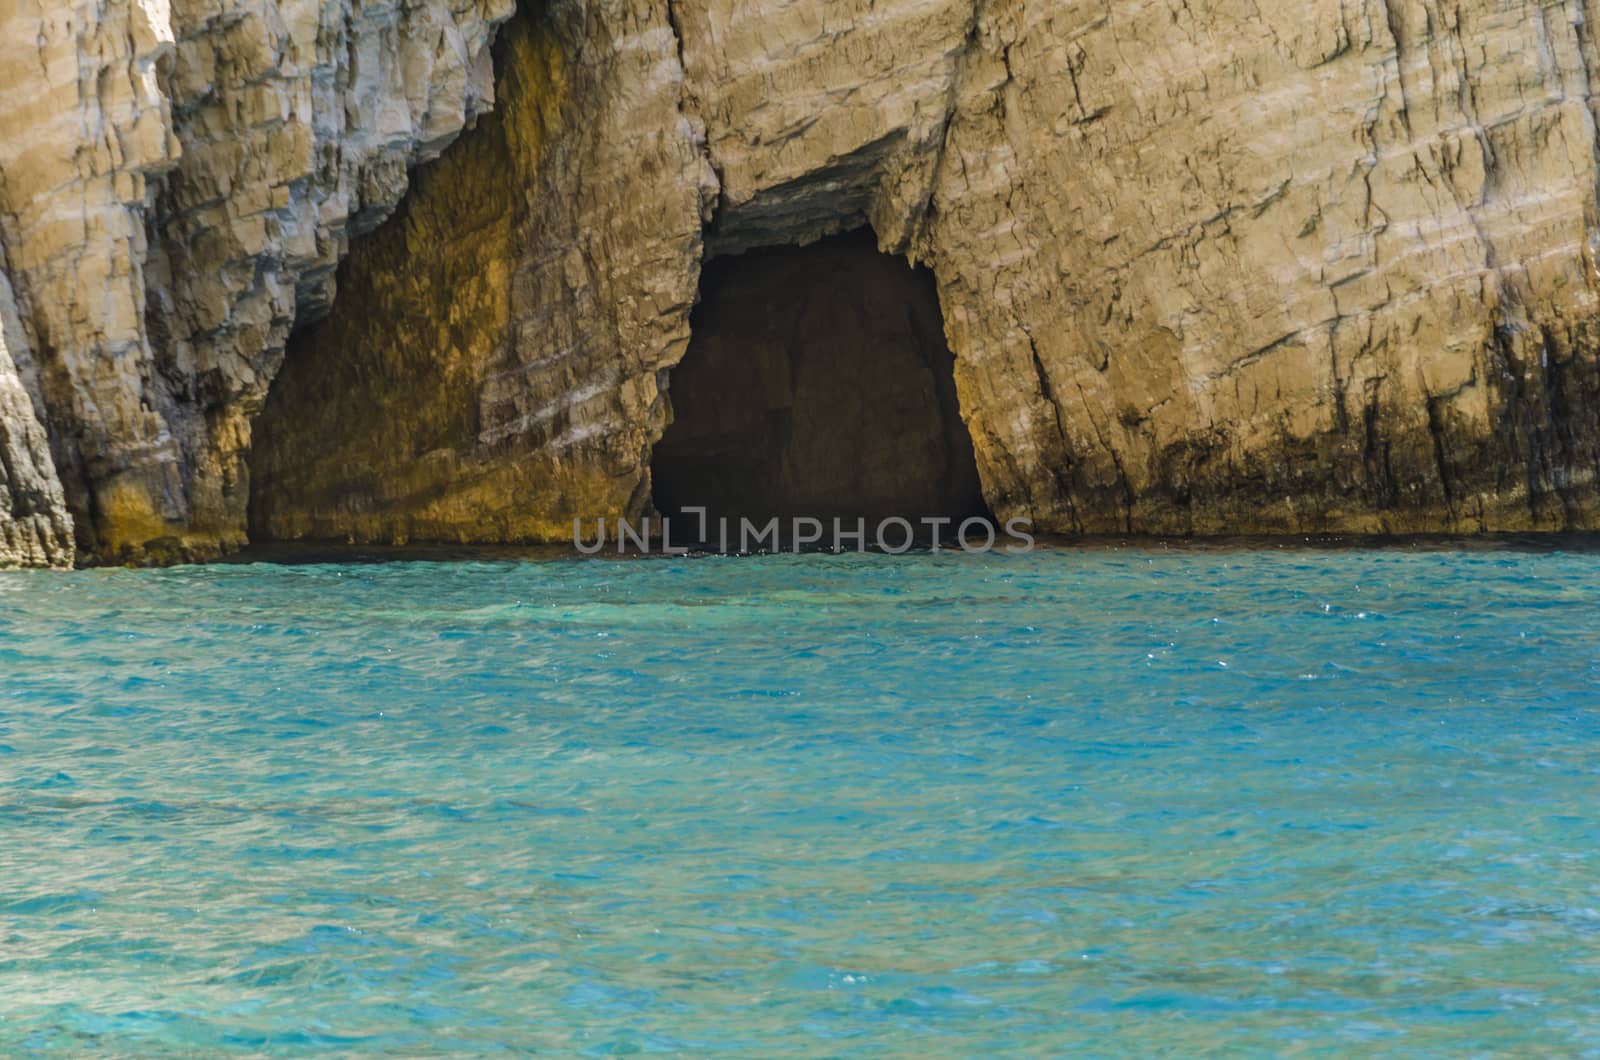 Maritime cave entrance on the shores of the island of Zakynthos in the Ionian Sea